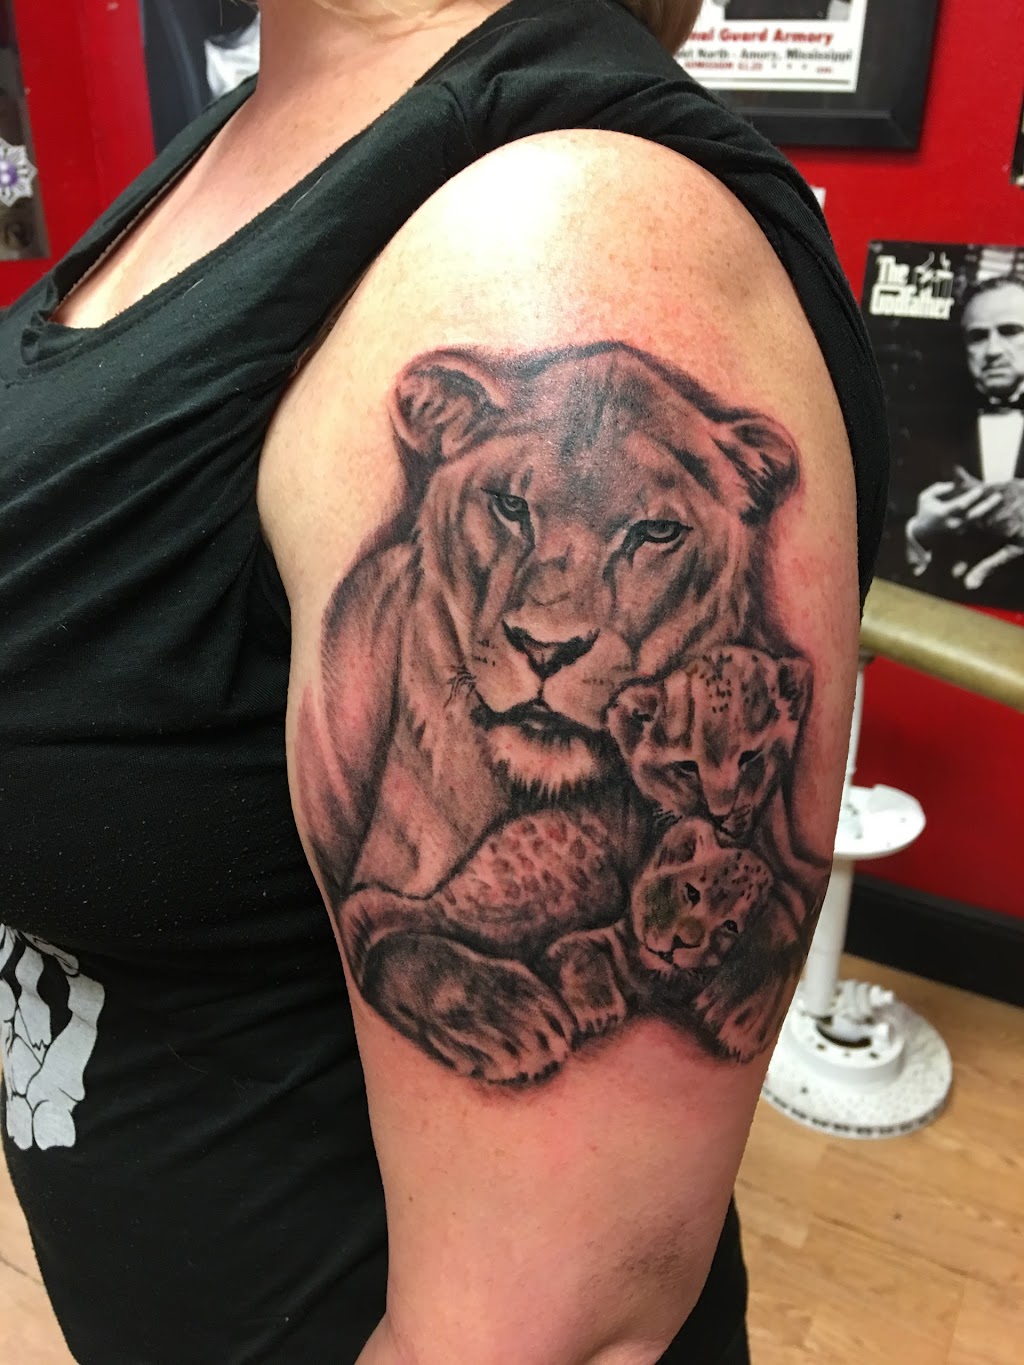 A Better Tattoo | 2154 S State Hwy 121 #400, Lewisville, TX 75067 | Phone: (972) 436-3450